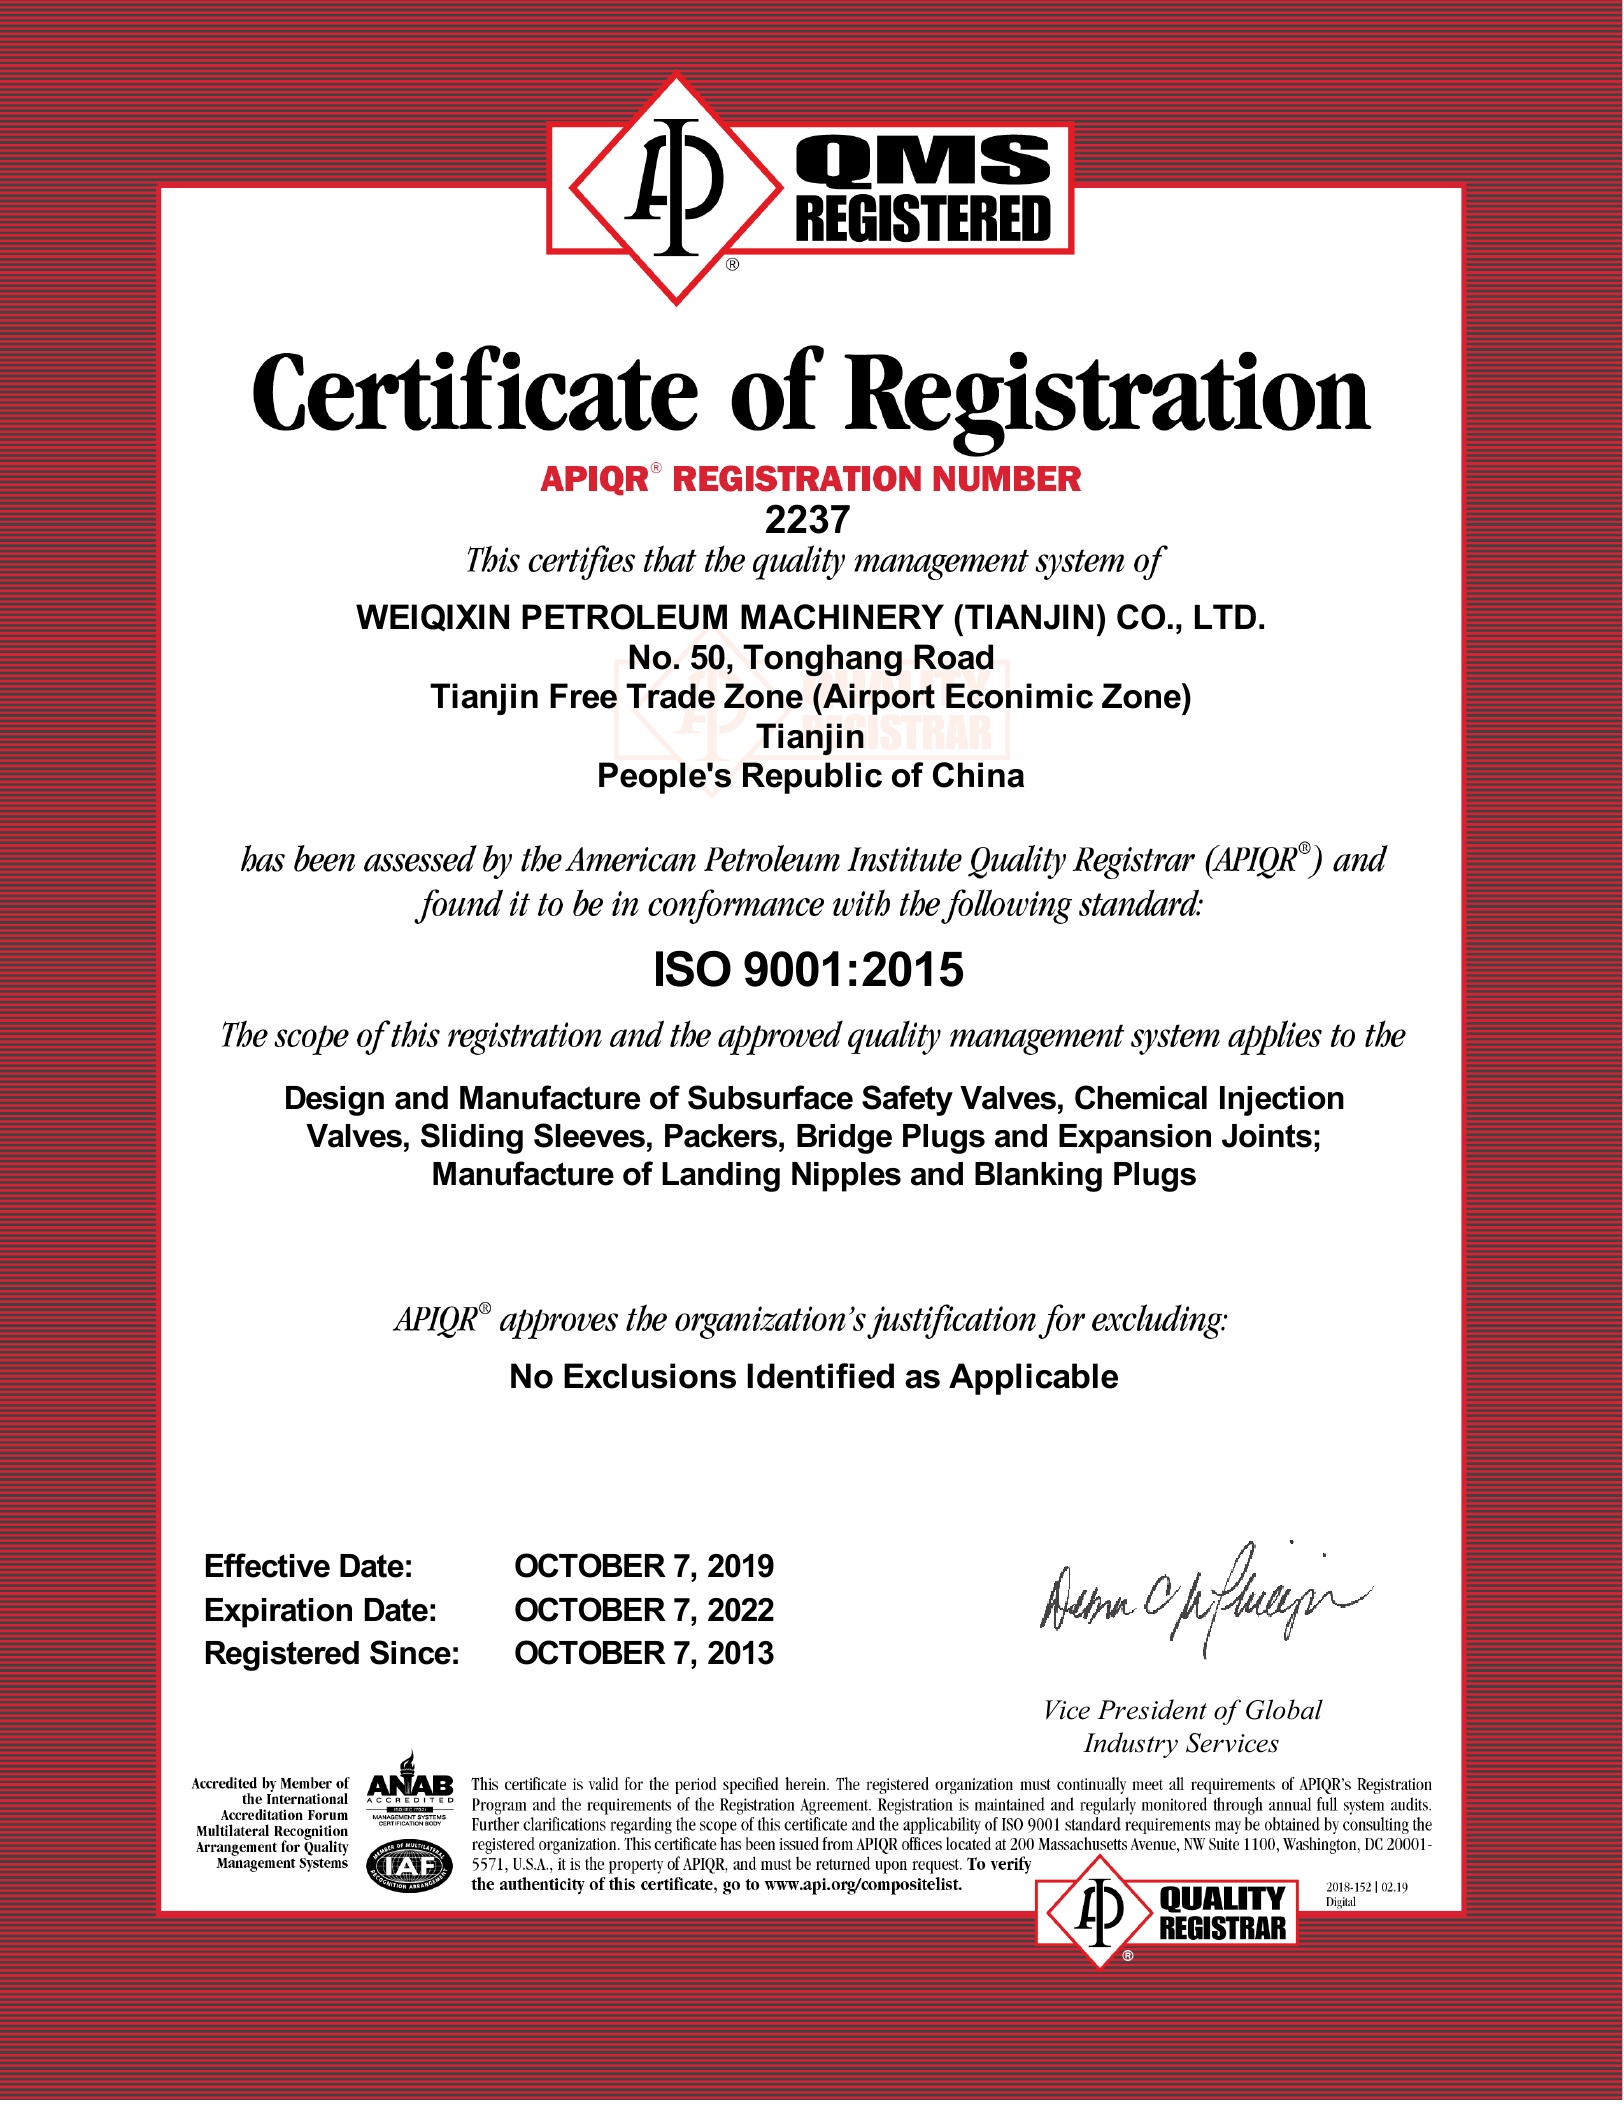 CertificateISO-2237_20190815135328